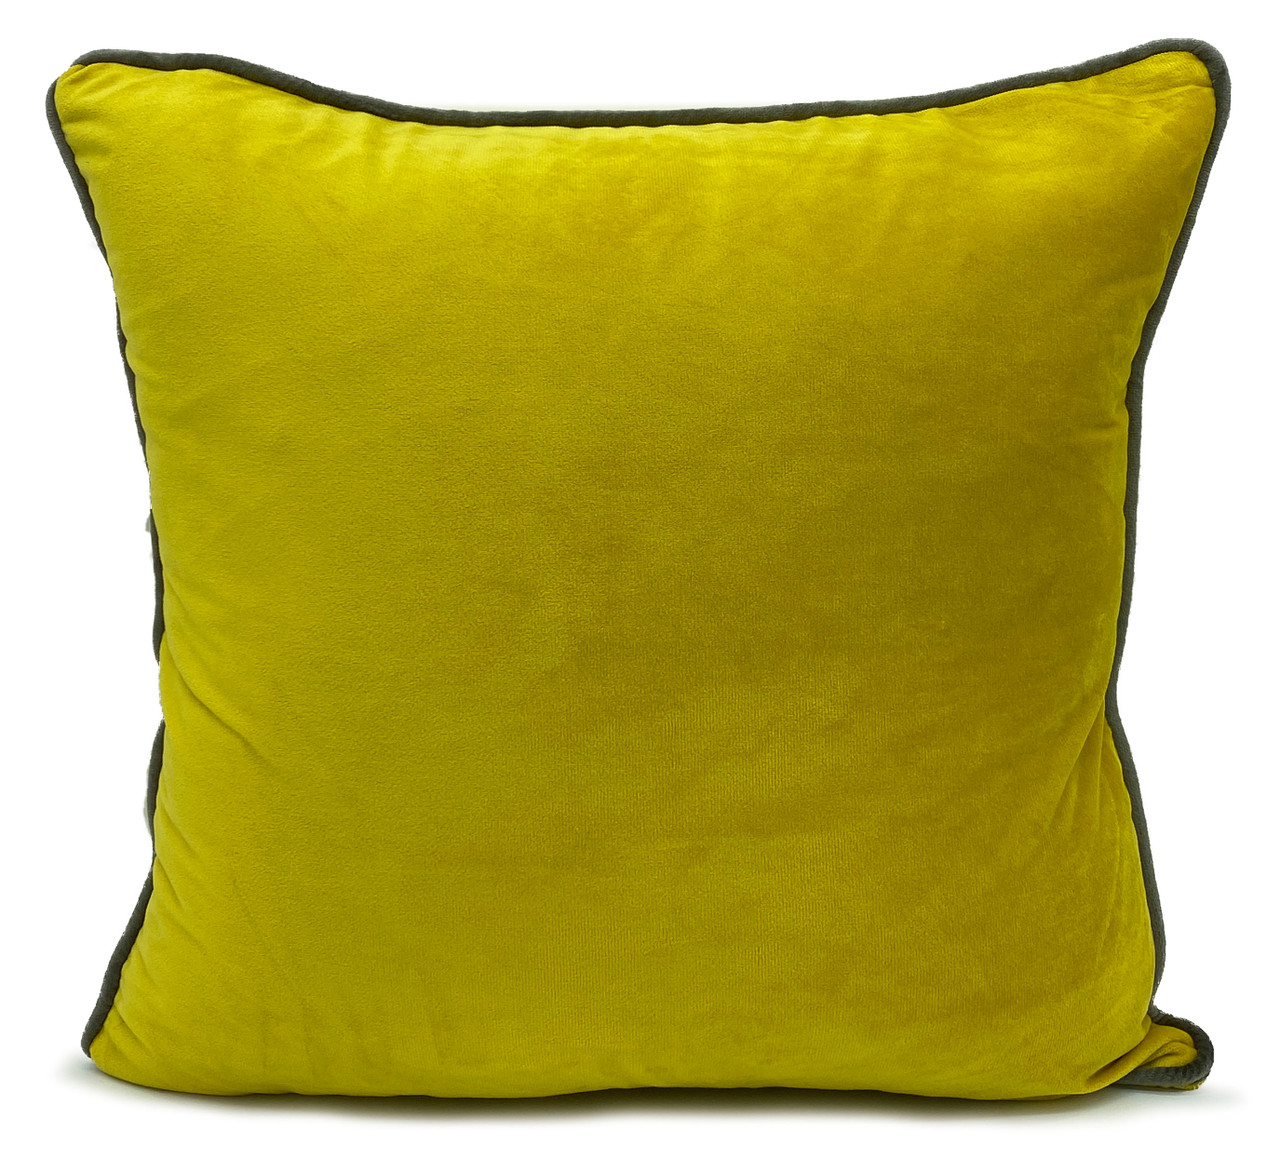 Cushions cover or filled  cushion Velour ITALY Plush Velvet 2 tone PIPED MUSTARD